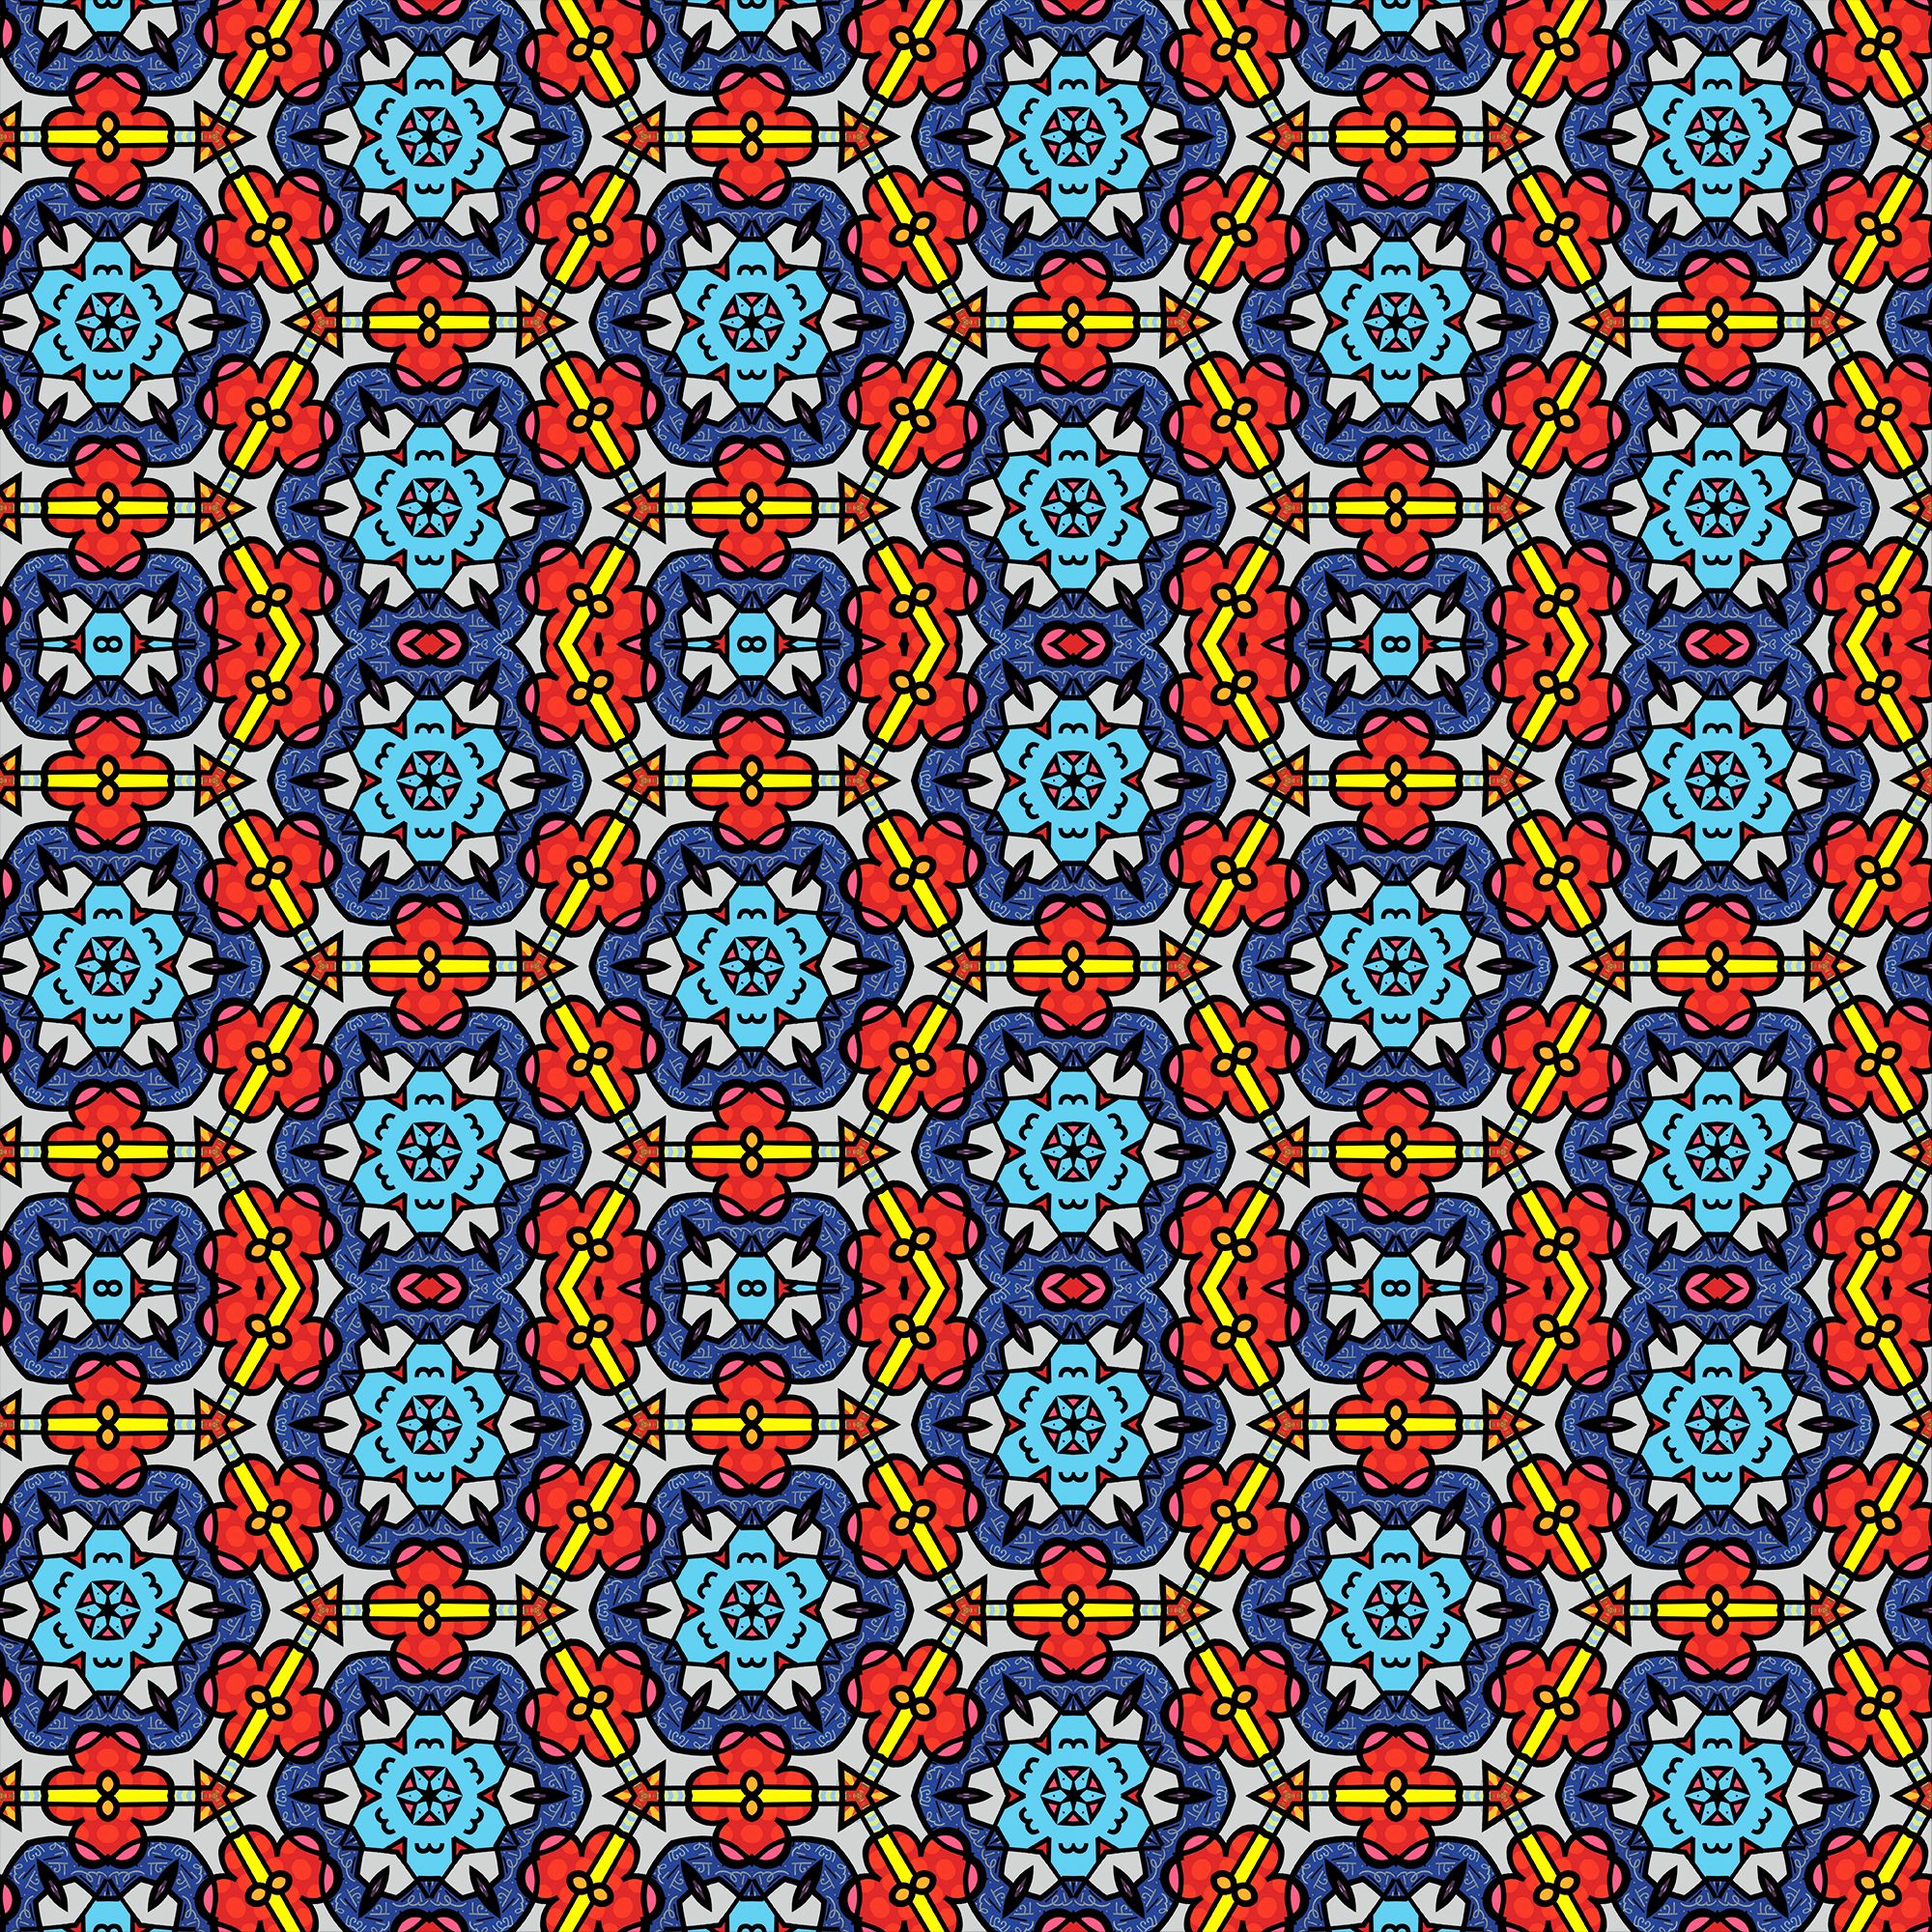 kaleidoscope, forms, patterns, multicolored, motley, texture, textures, form mobile wallpaper